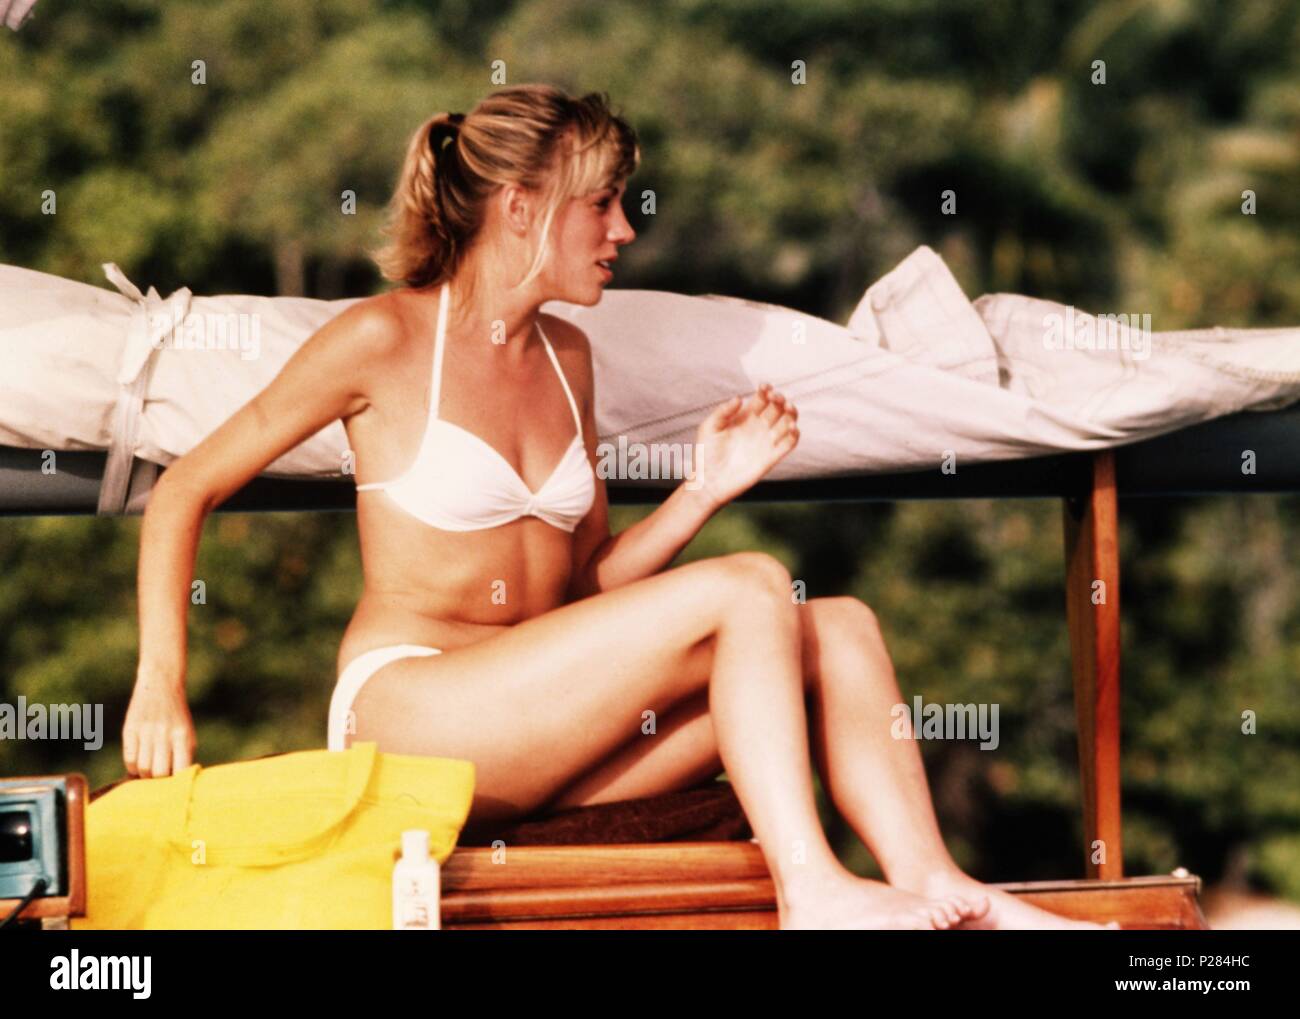 Bess Armstrong High Resolution Stock Photography and Images - Alamy